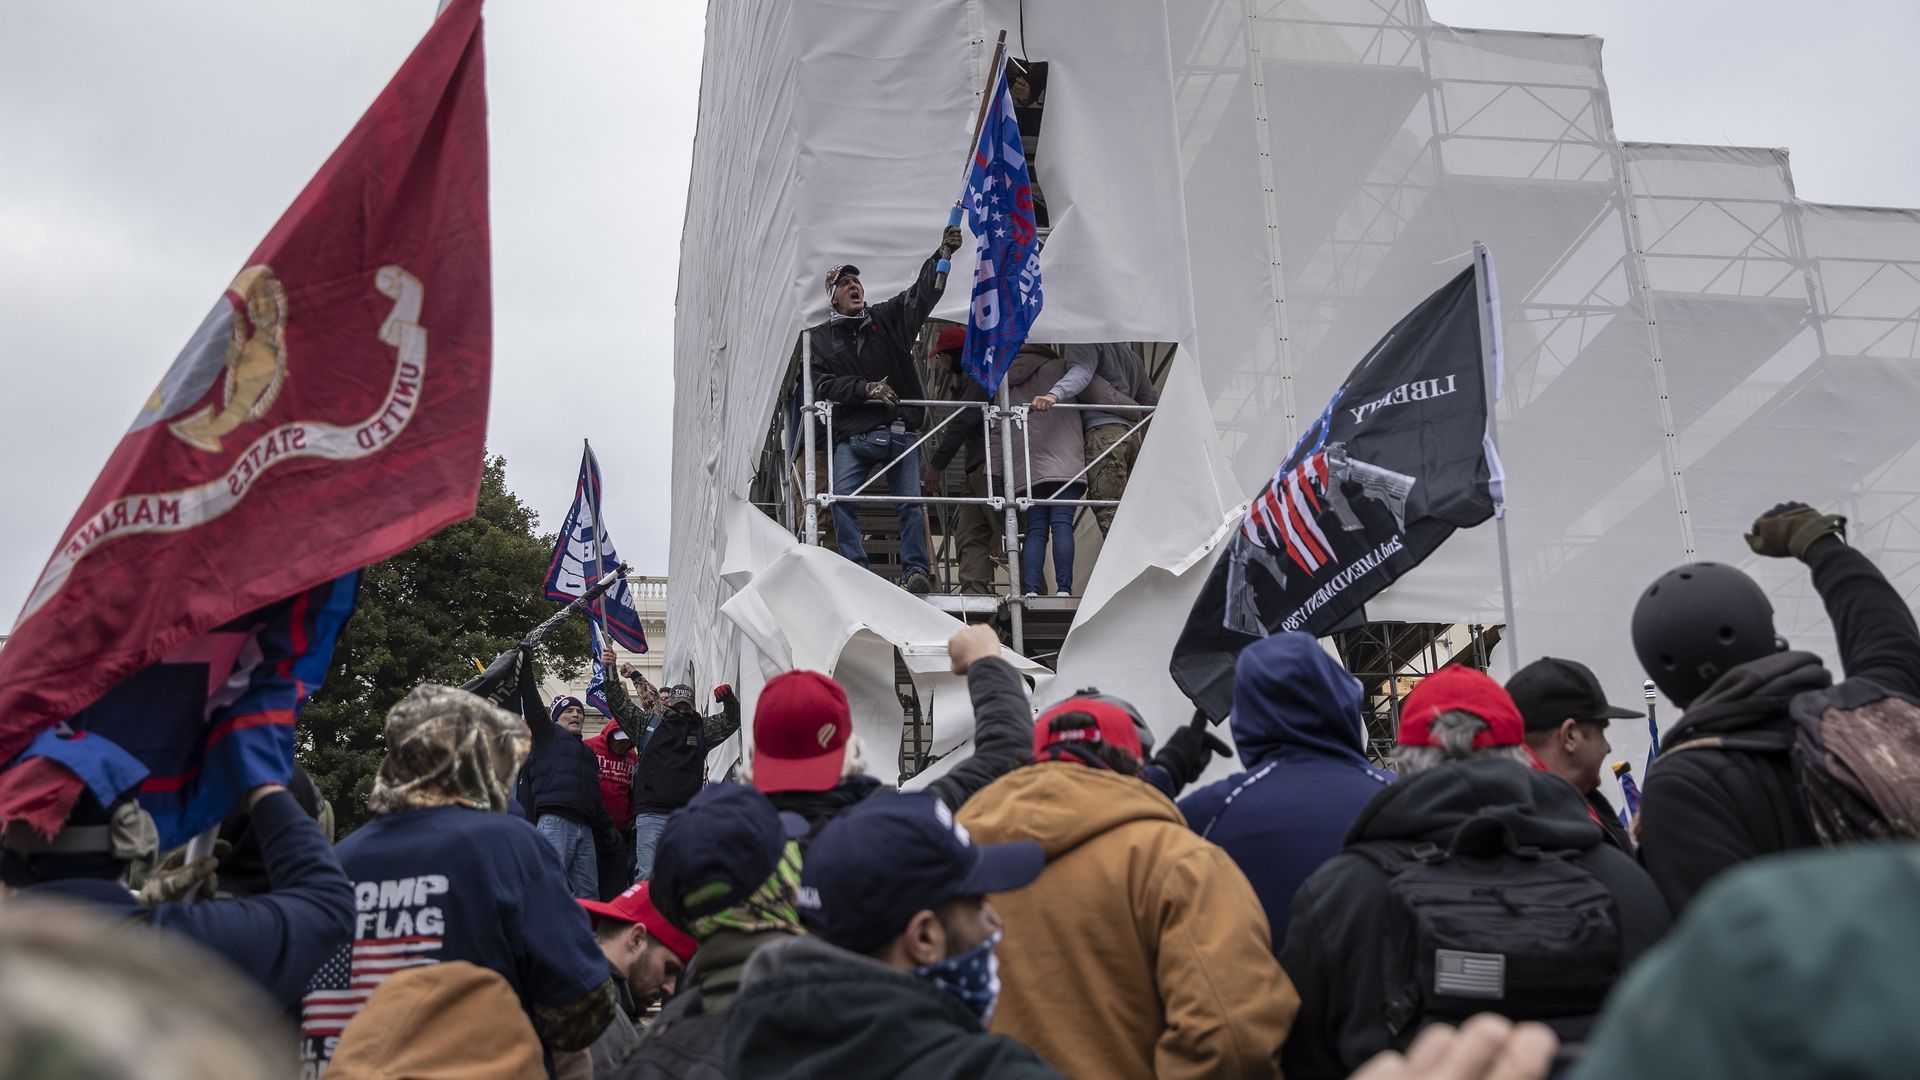 A scene from the Capitol insurrection on Jan. 6. Photo: Victor J. Blue/Bloomberg via Getty Images